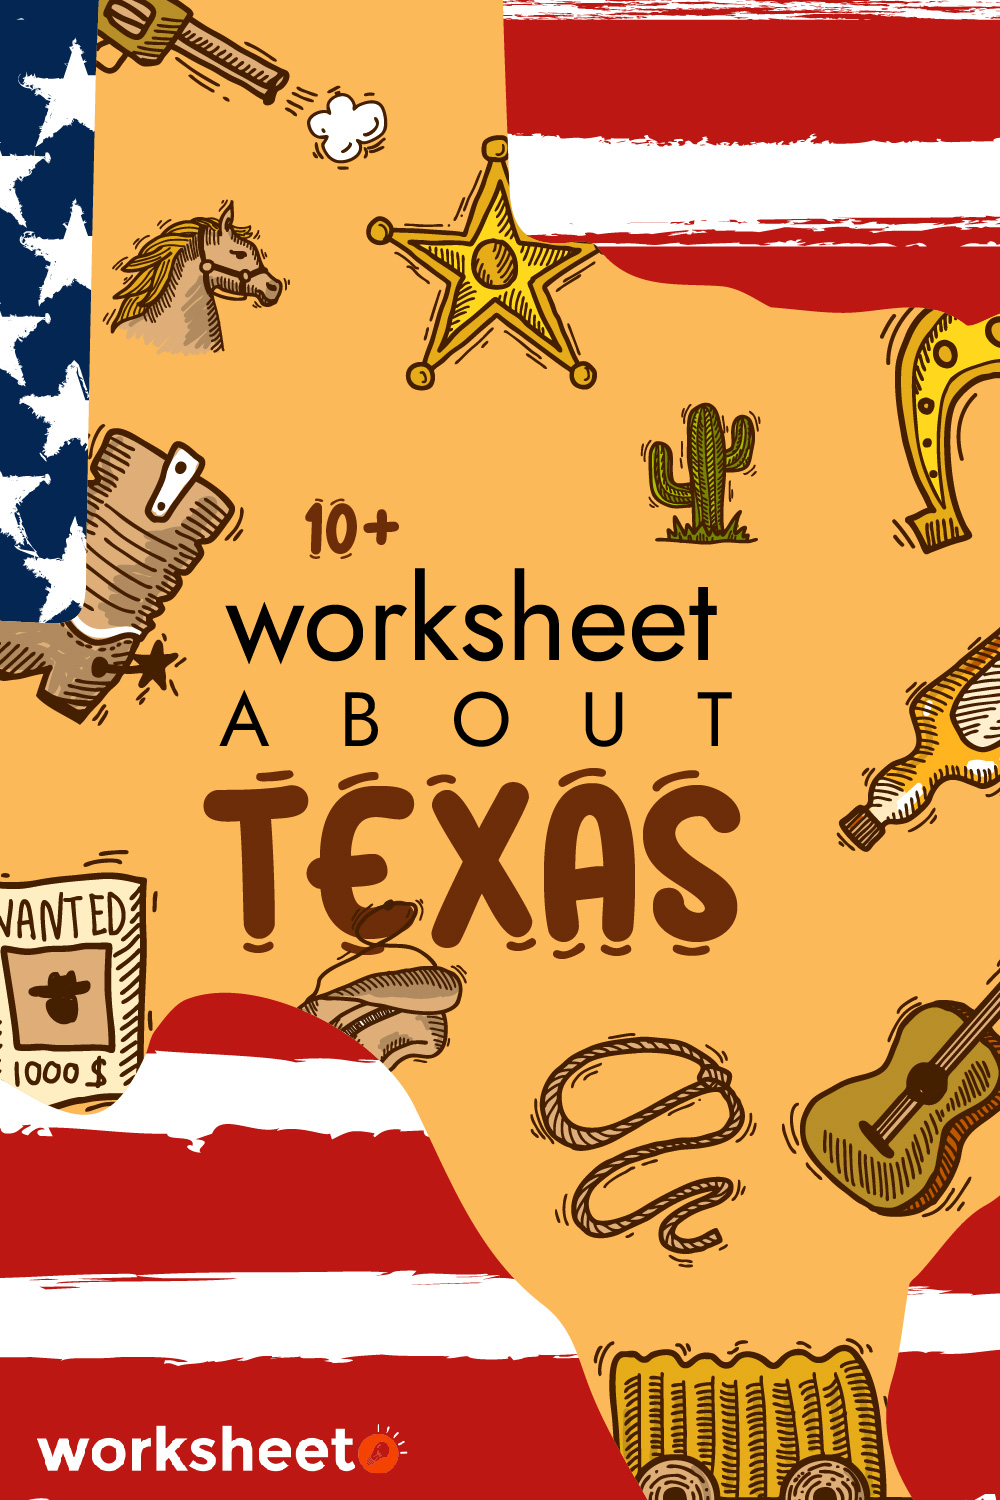 9 Images of Worksheet About Texas